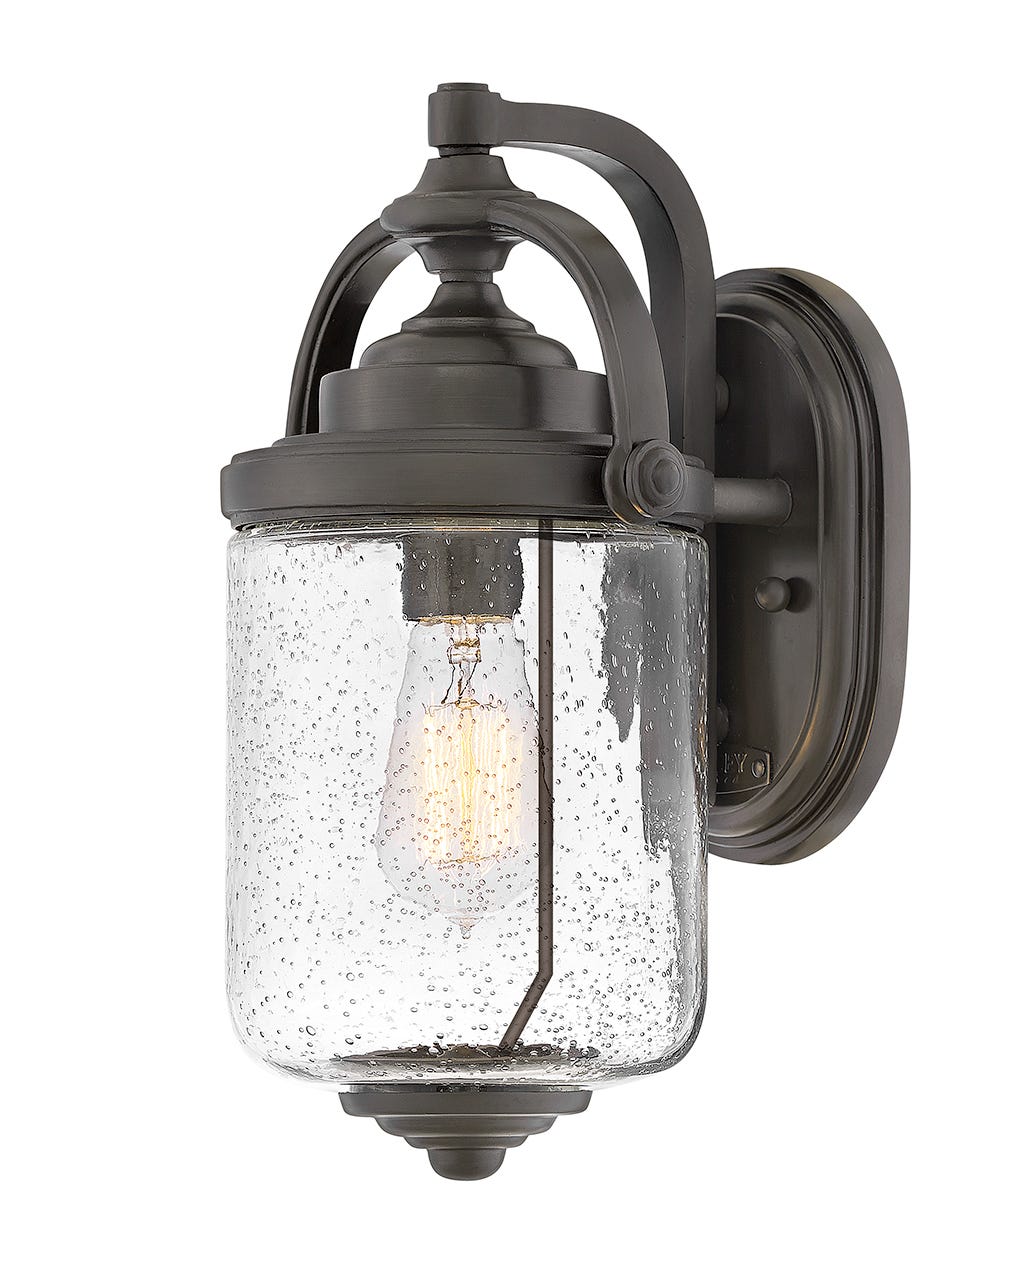 OUTDOOR WILLOUGHBY Wall Mount Lantern Outdoor l Wall Hinkley Oil Rubbed Bronze 8.25x8.25x14.0 